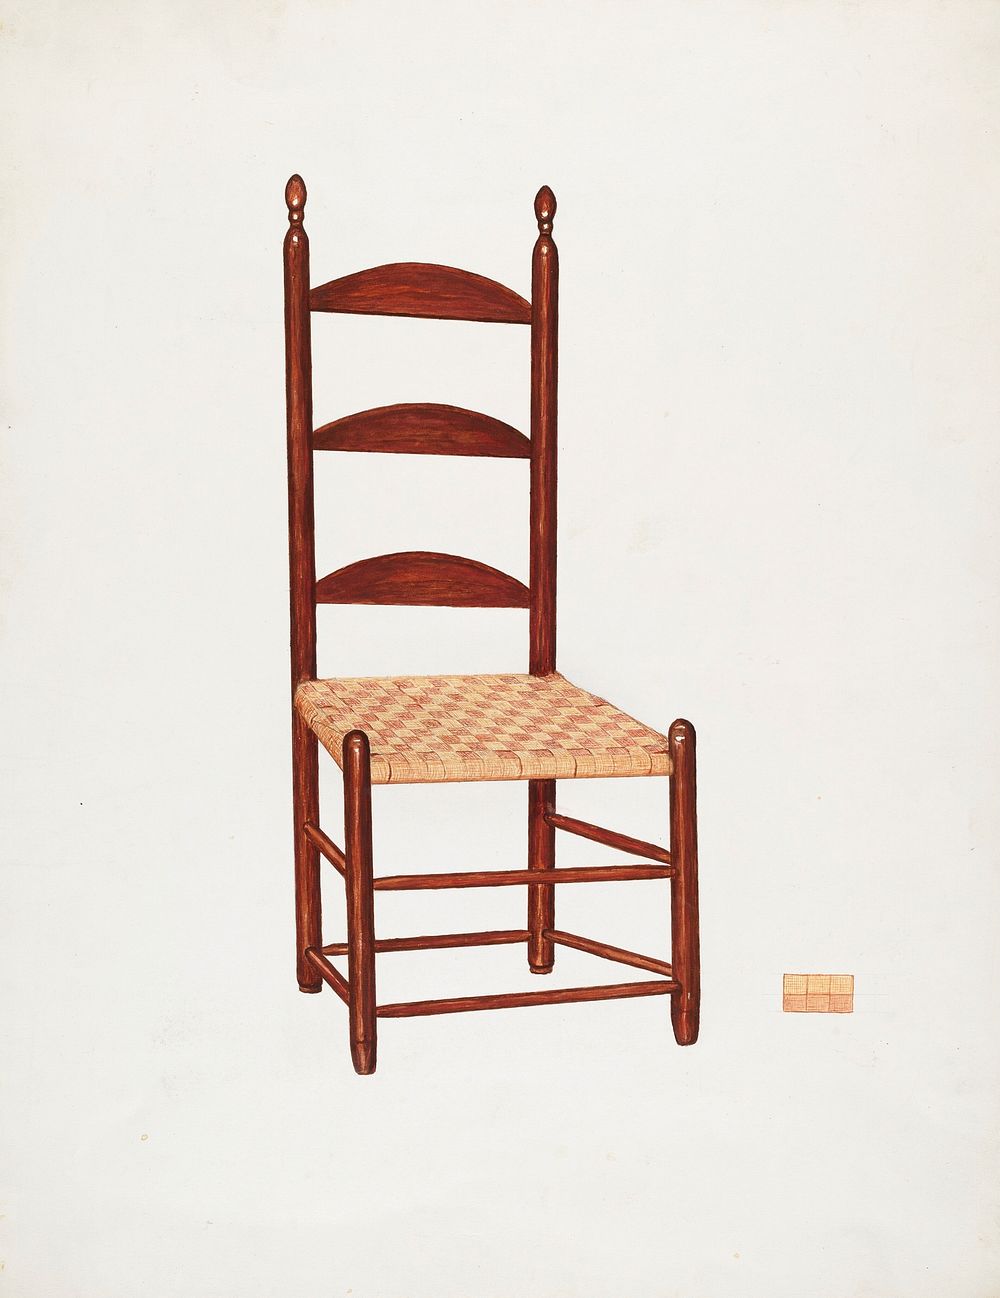 Chair (1935&ndash;1942) by unknown American 20th century artist. Original from The National Gallery of Art. Digitally…